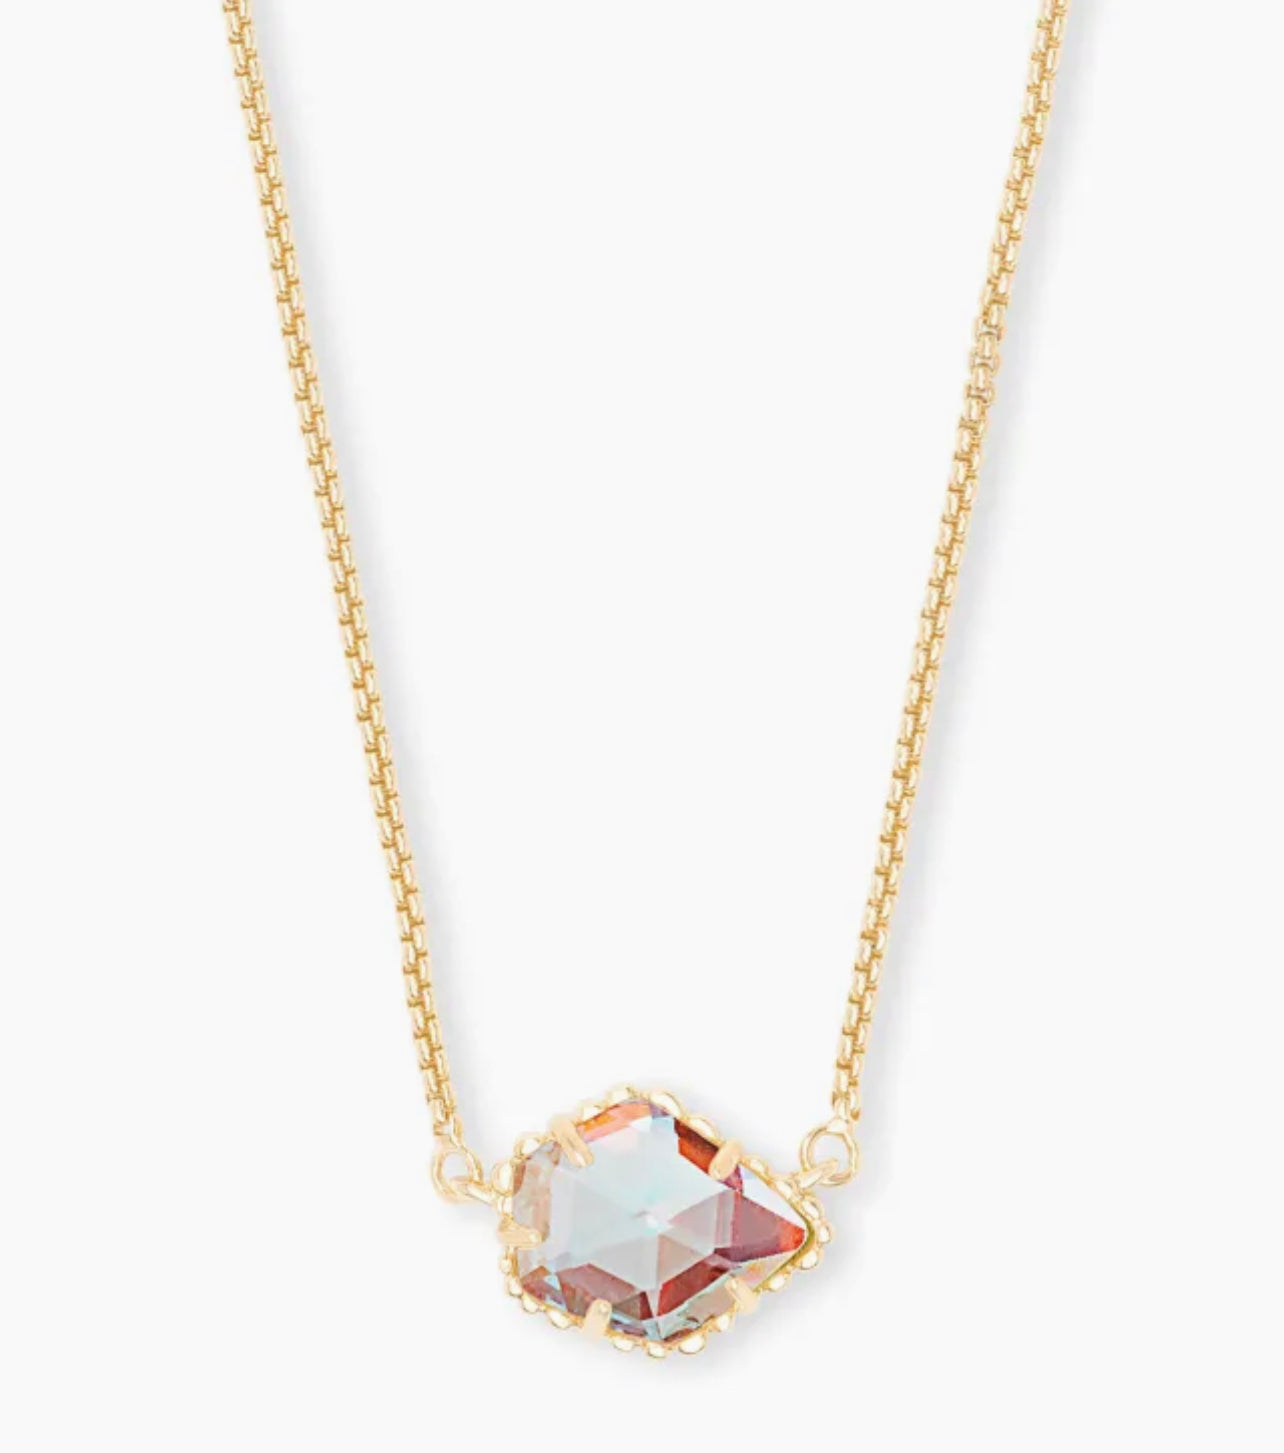 Kendra Scott-Tess Gold Pendant Necklace in Dichroic Glass 4217704127